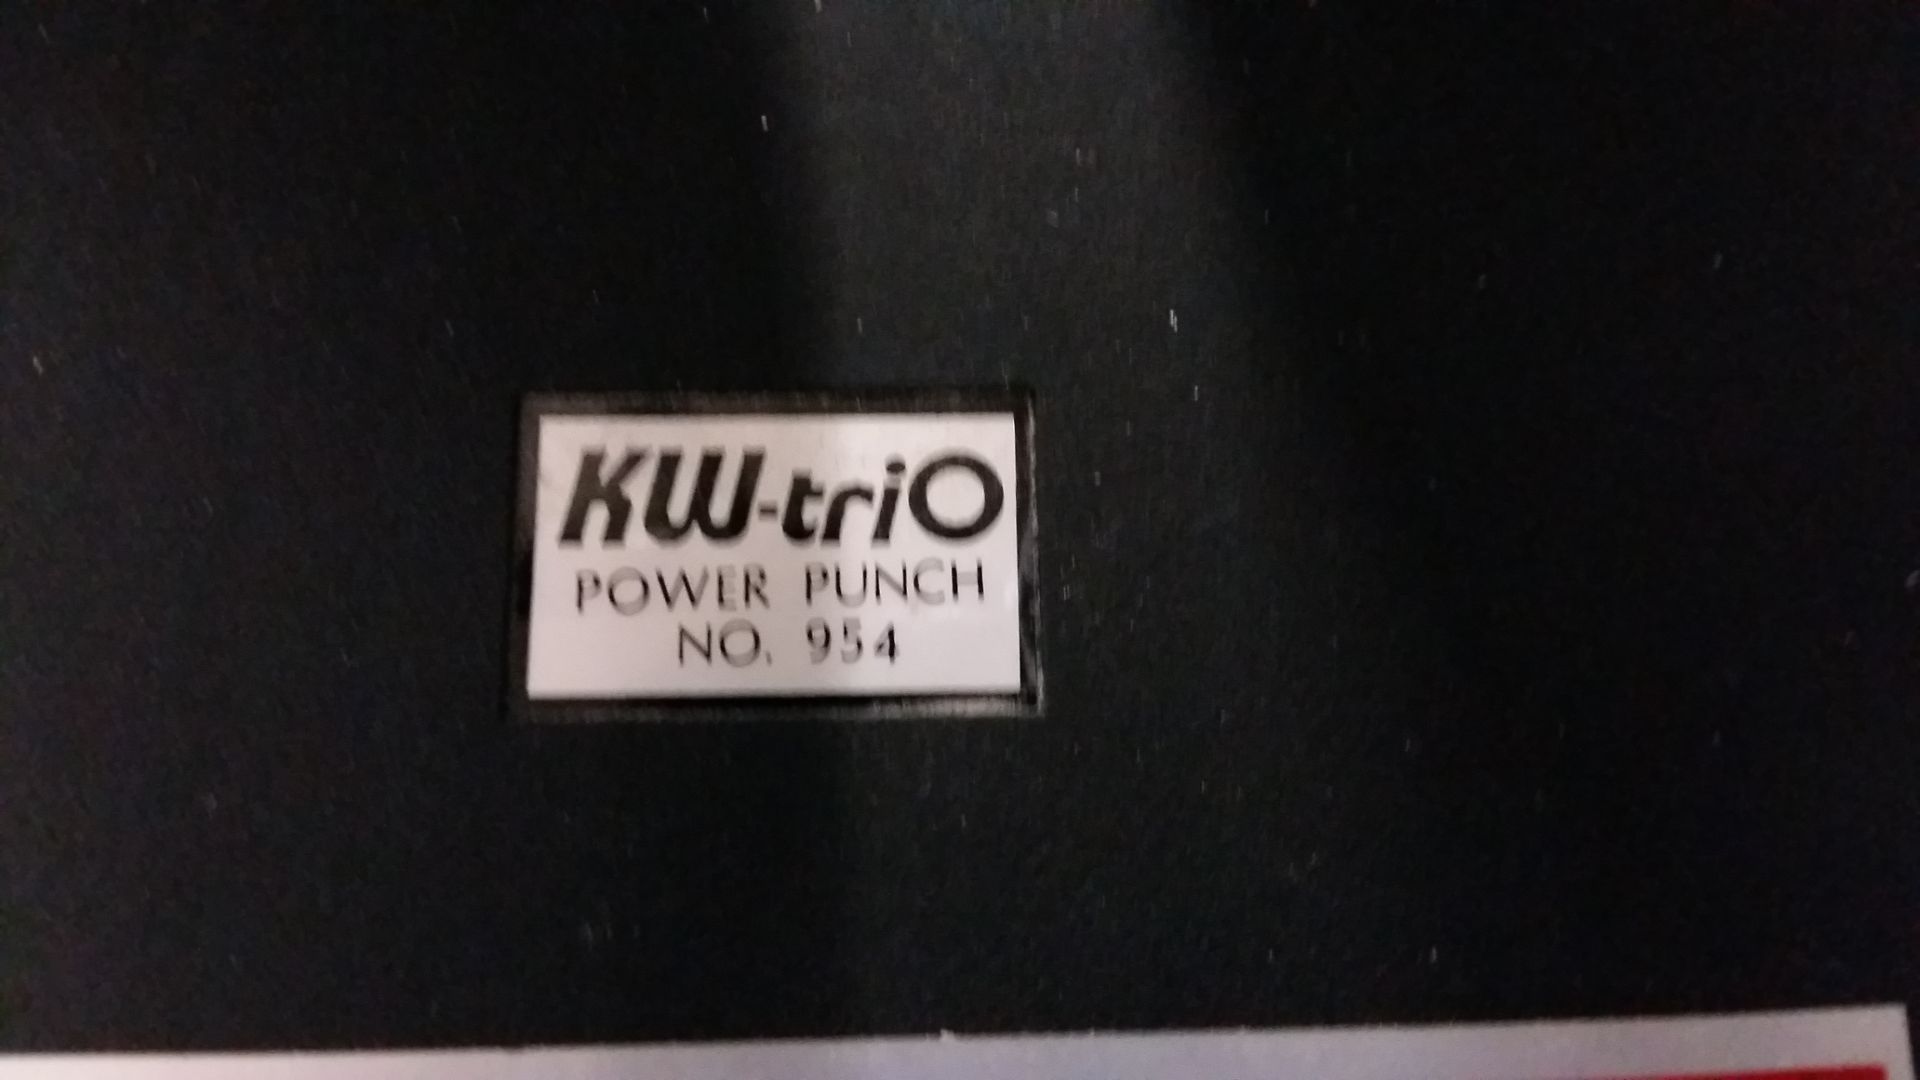 KW-Trio 954 Power 4-Hole Punch - Image 3 of 3